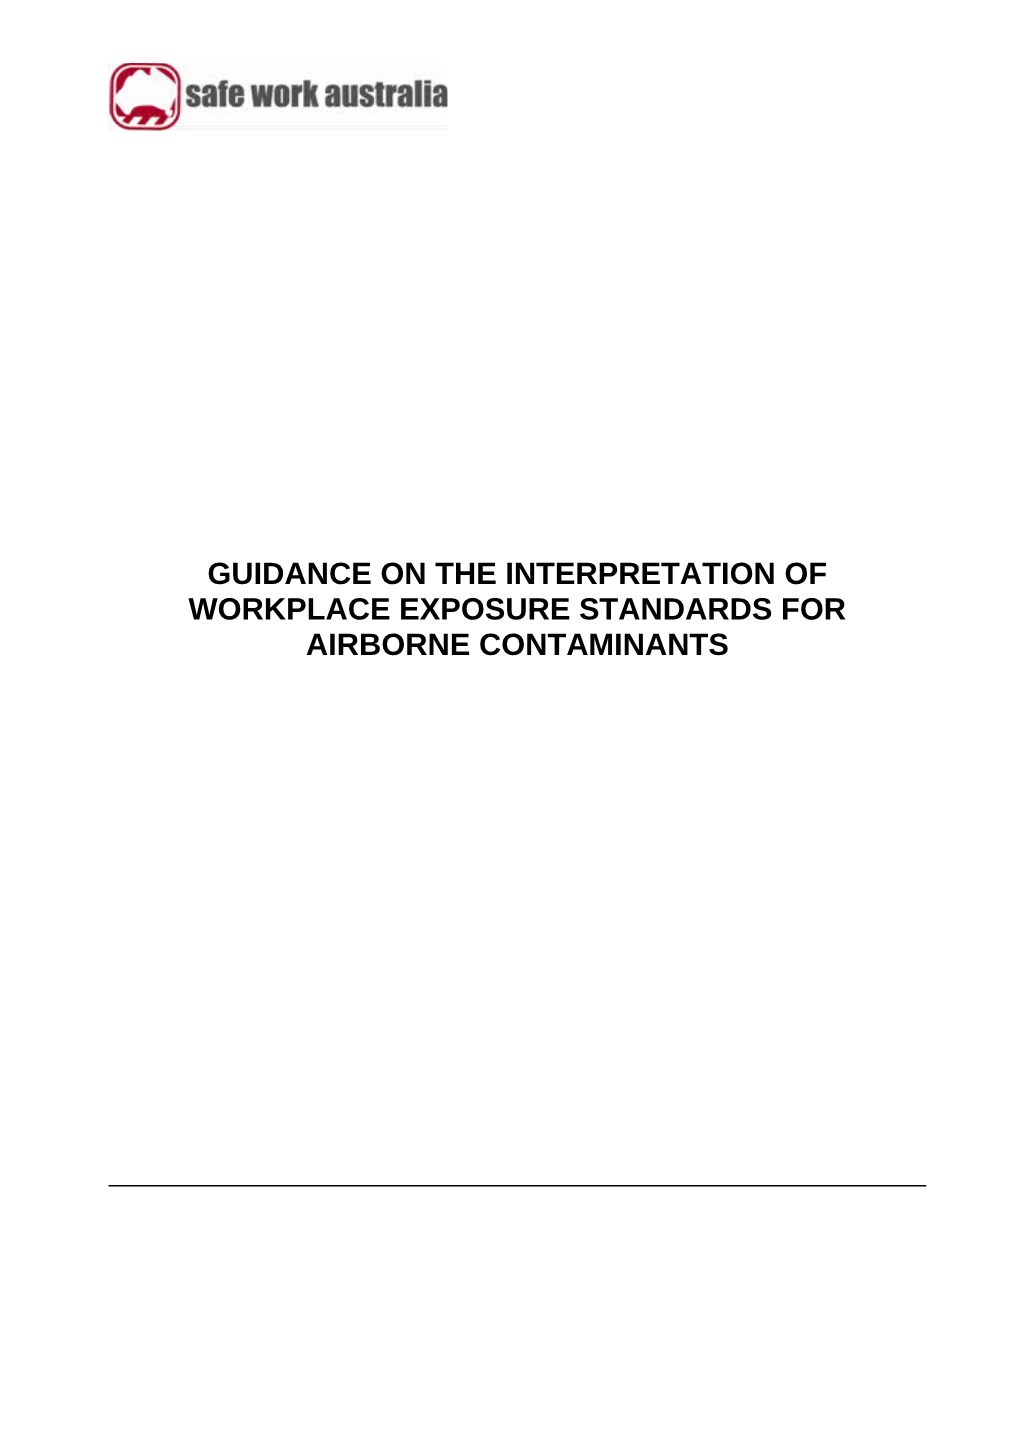 Guidance on the Interpretation of Workplace Exposure Standards for Airborne Contaminants